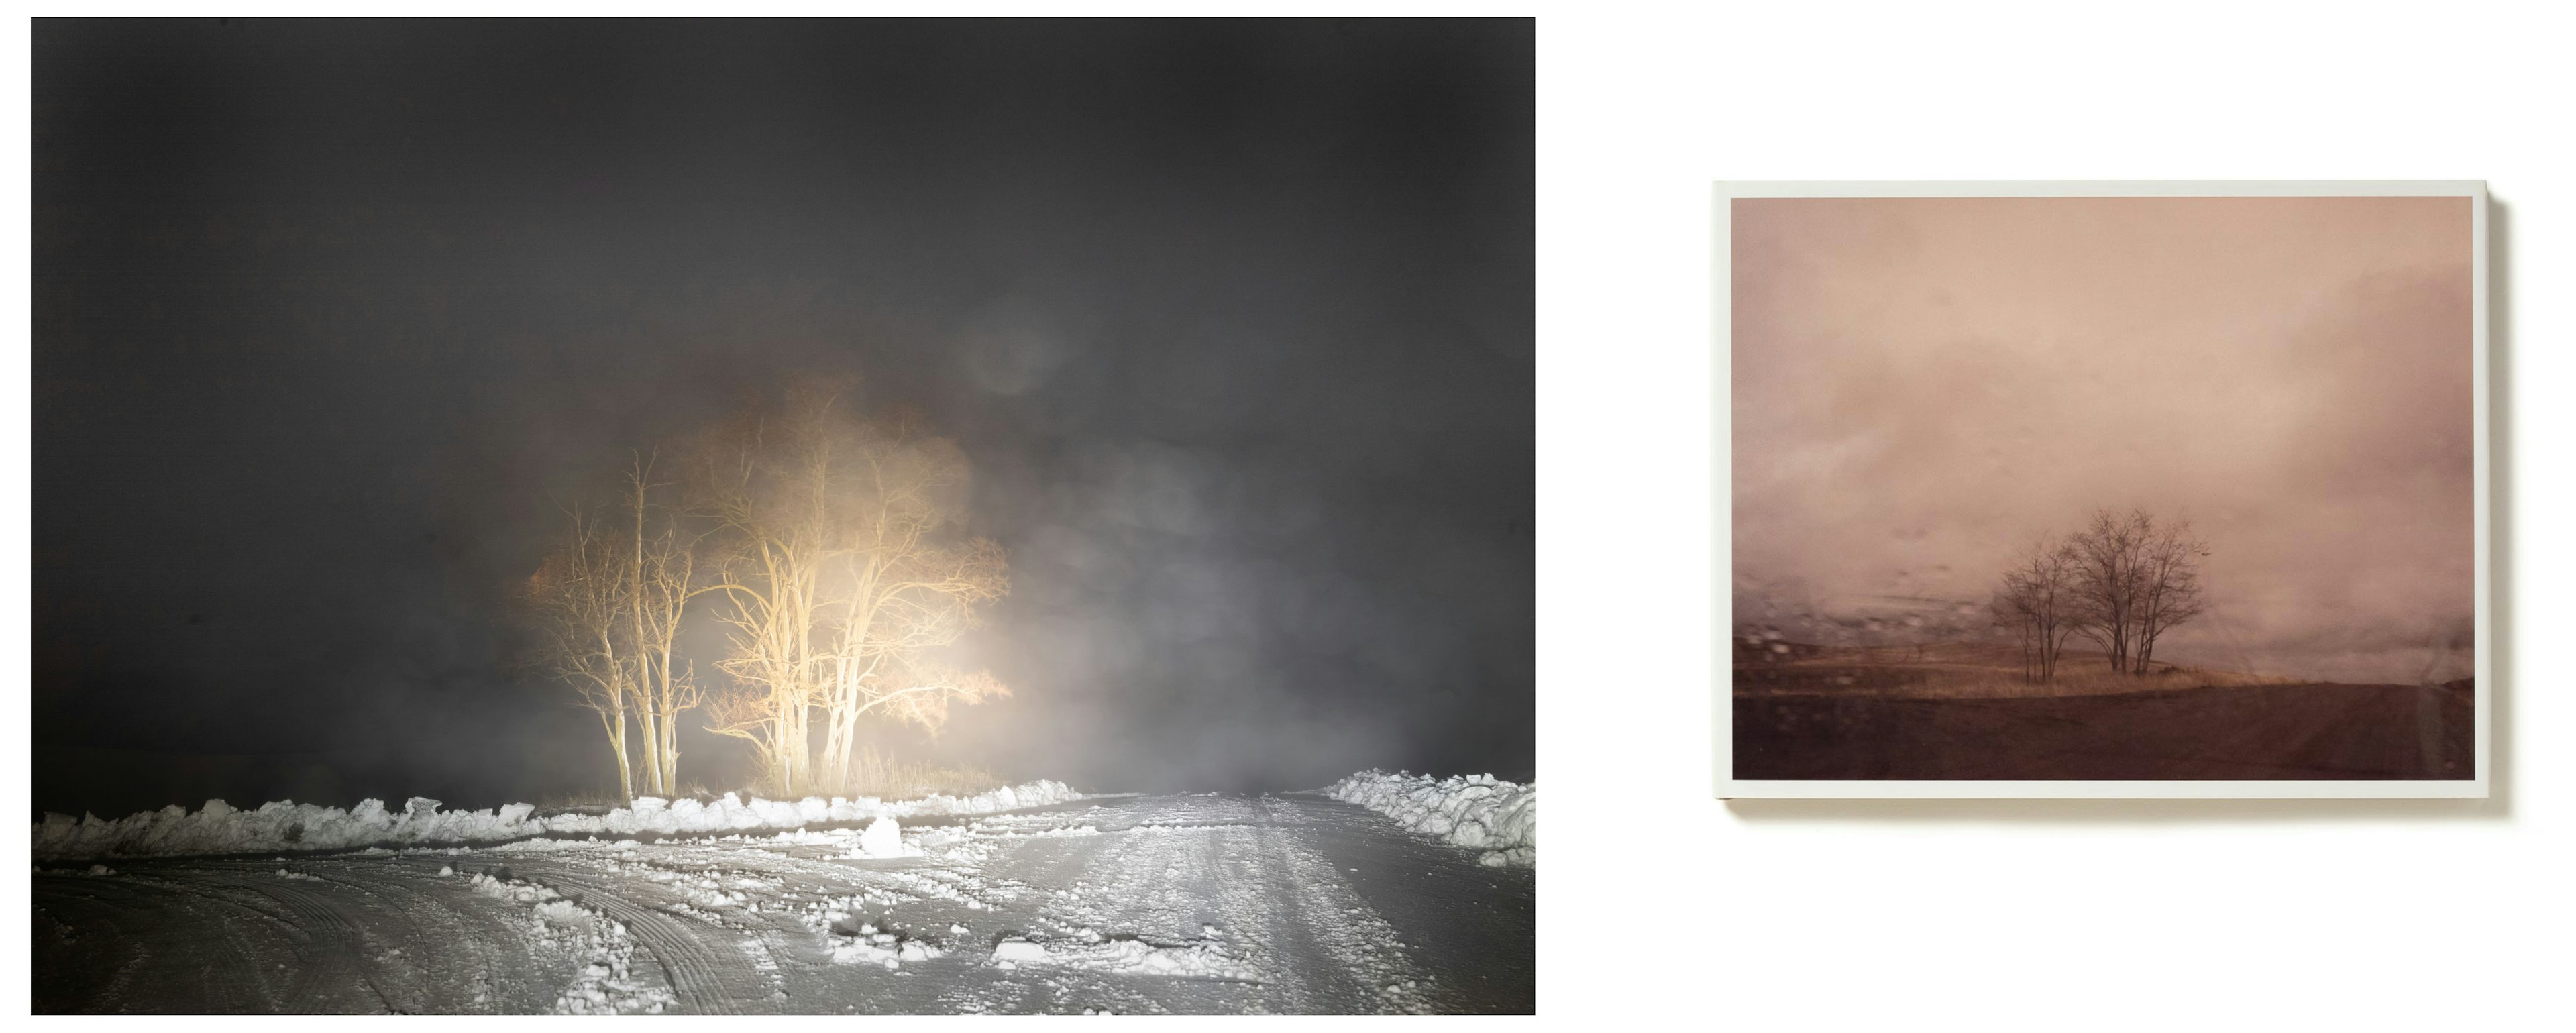 Left: The Black Mechanism #42 by Todd Hido, Obscura Curated Commission. Right: cover image on Roaming, Todd Hido.